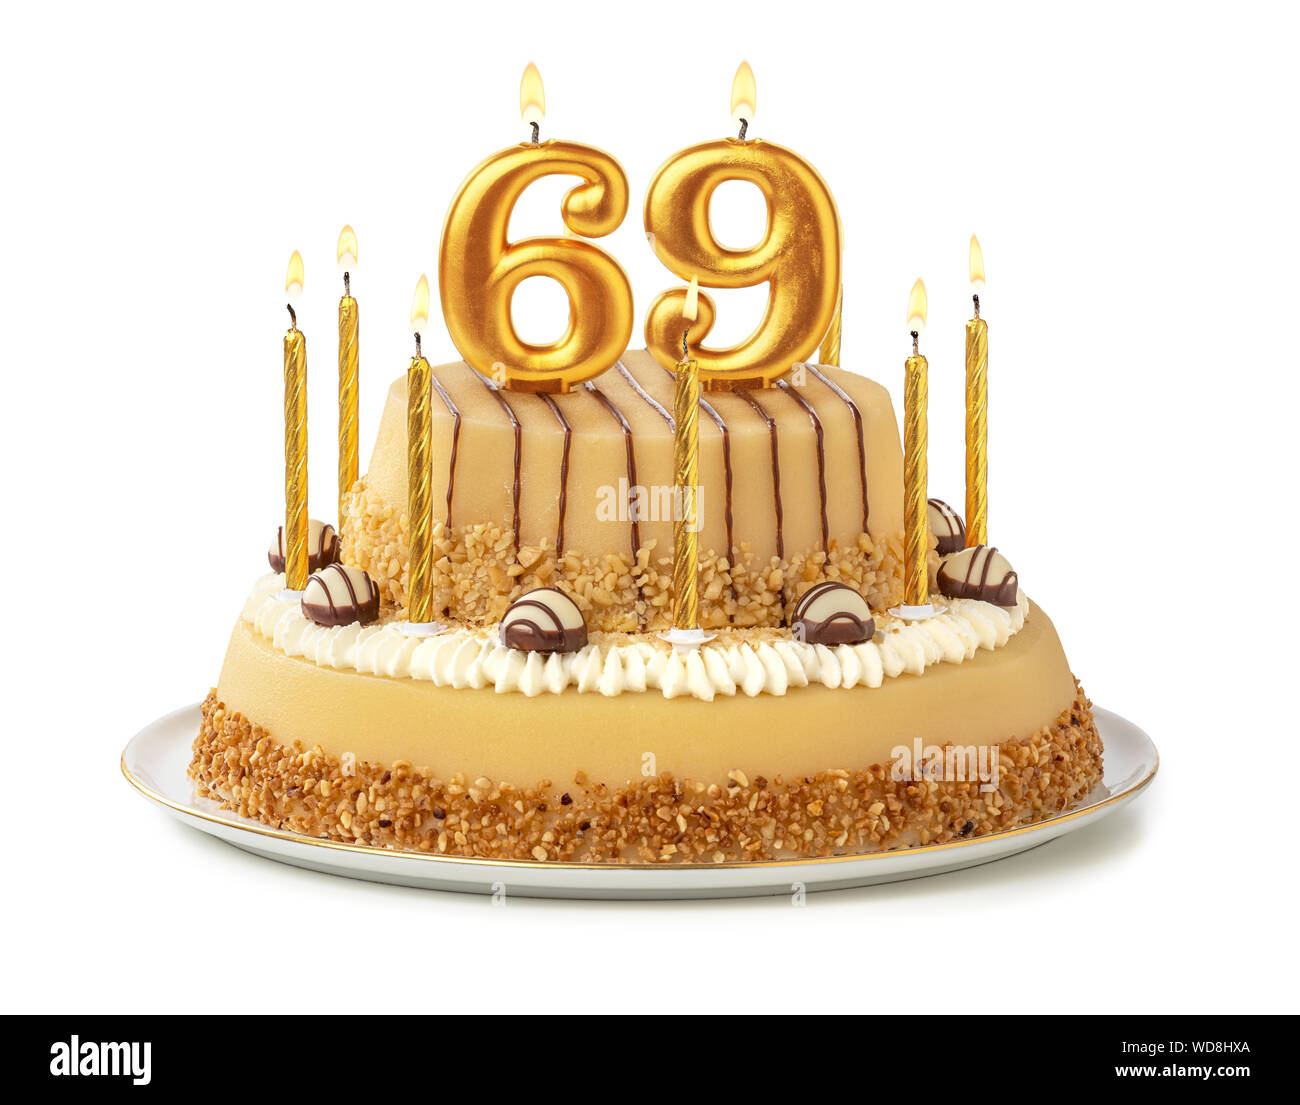 Festive cake with golden candles - Number 69 Stock Photo